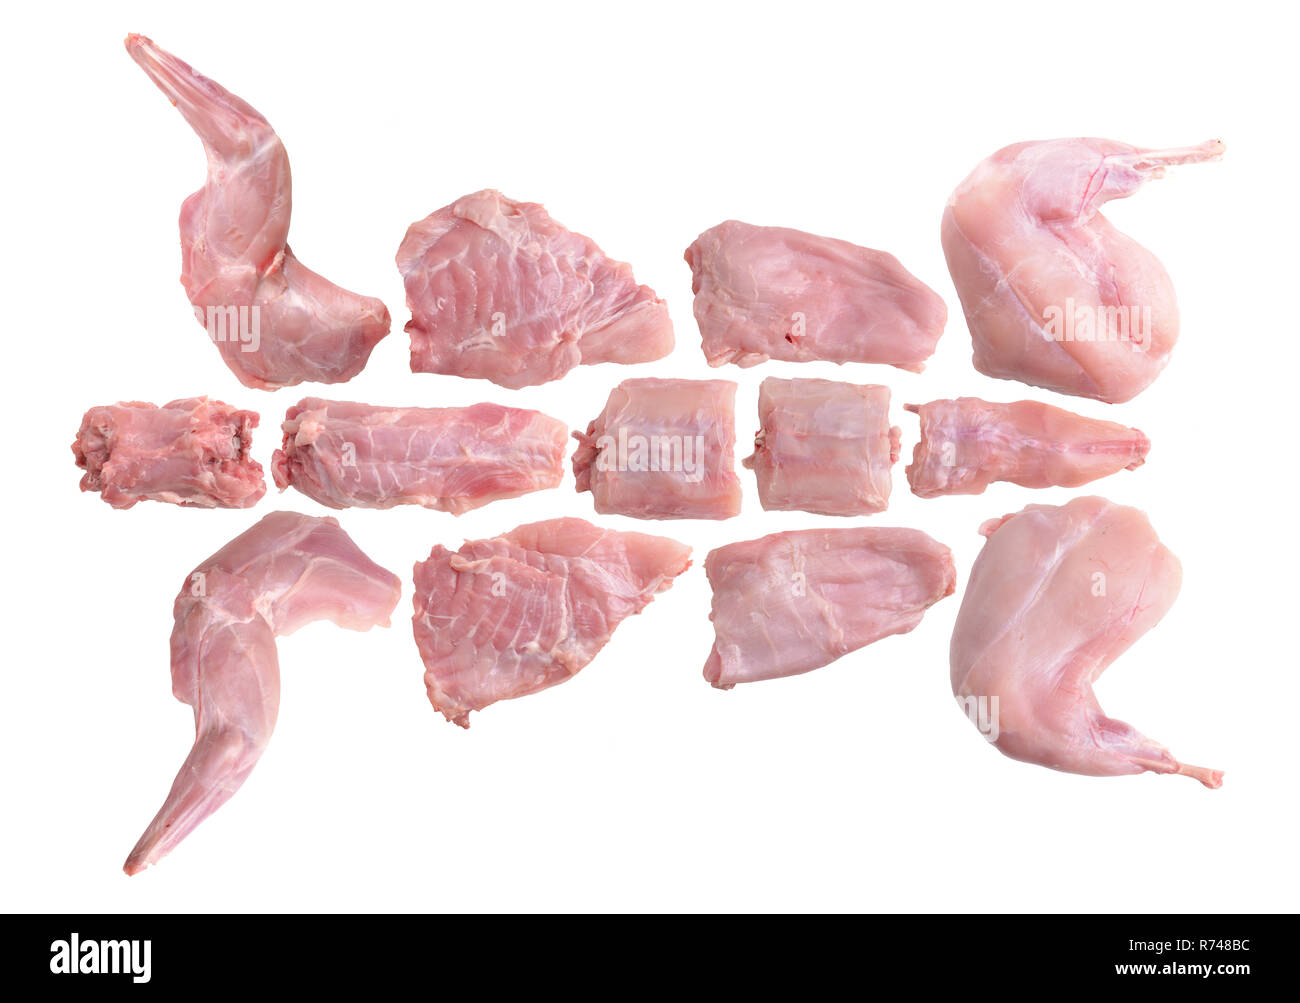 How to prepare a rabbit for cooking. Isolated. Stock Photo